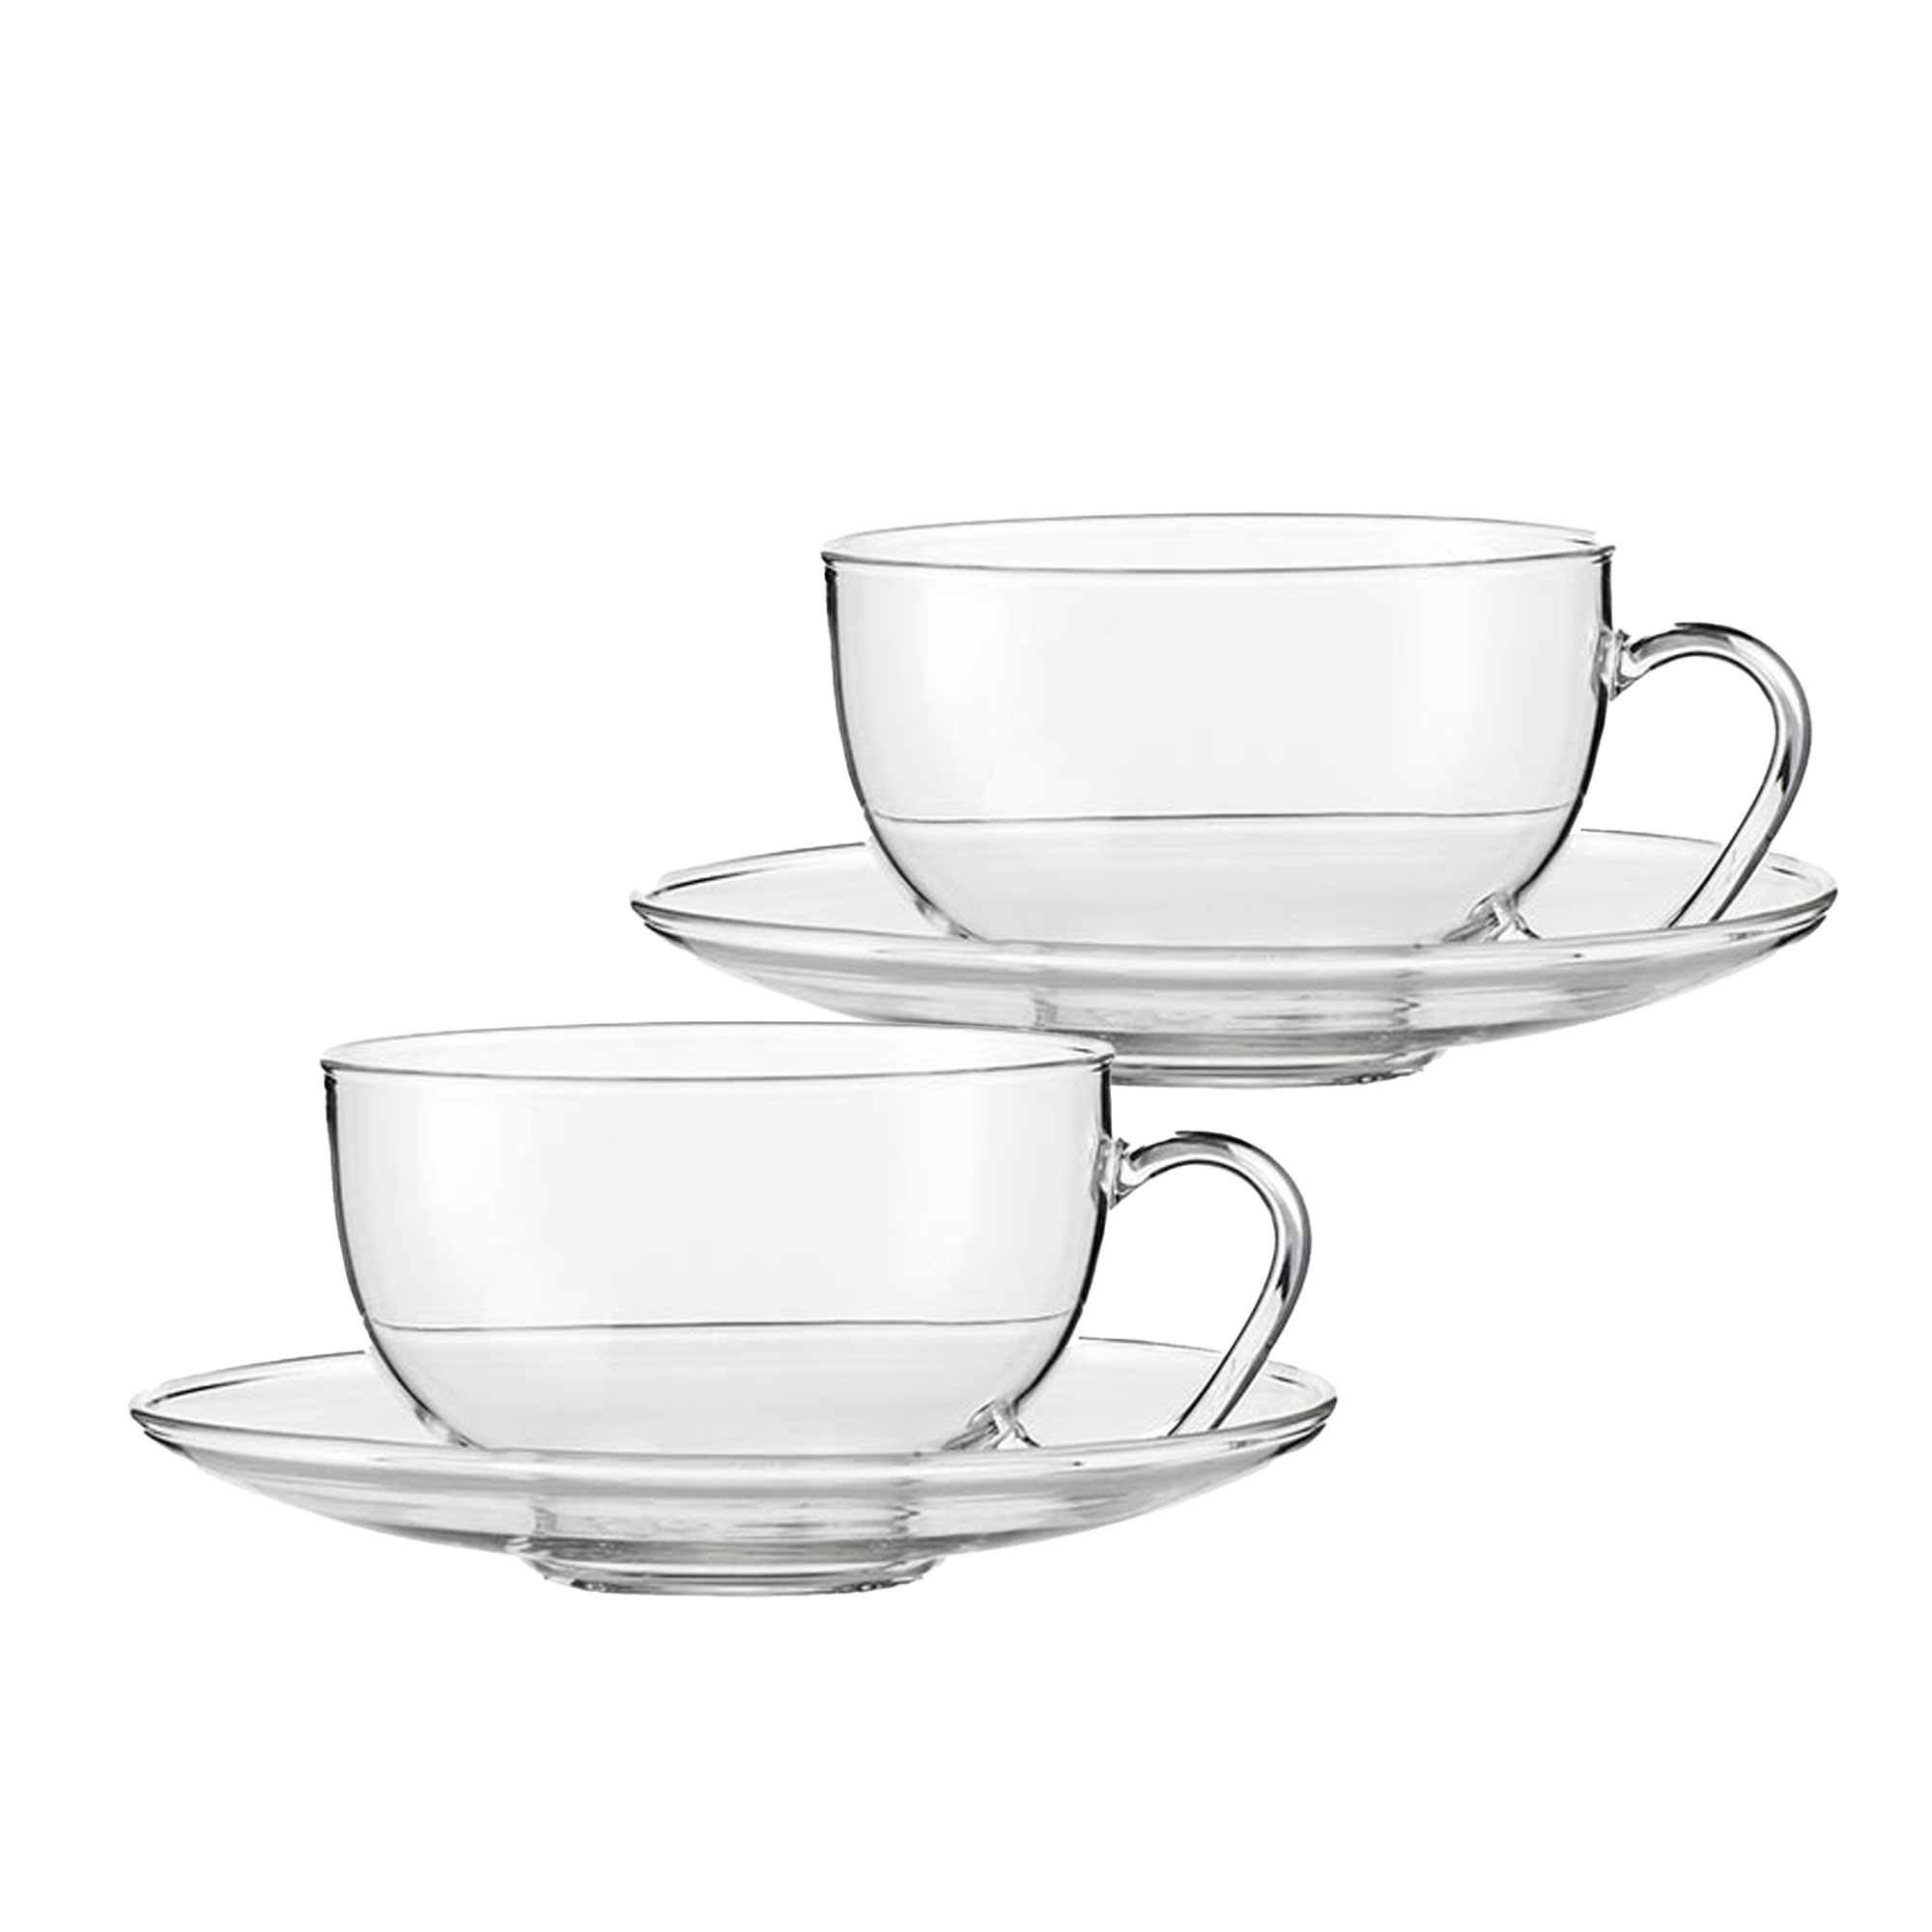 Jenaer Glas - Relax cup 360 ml - set of 2